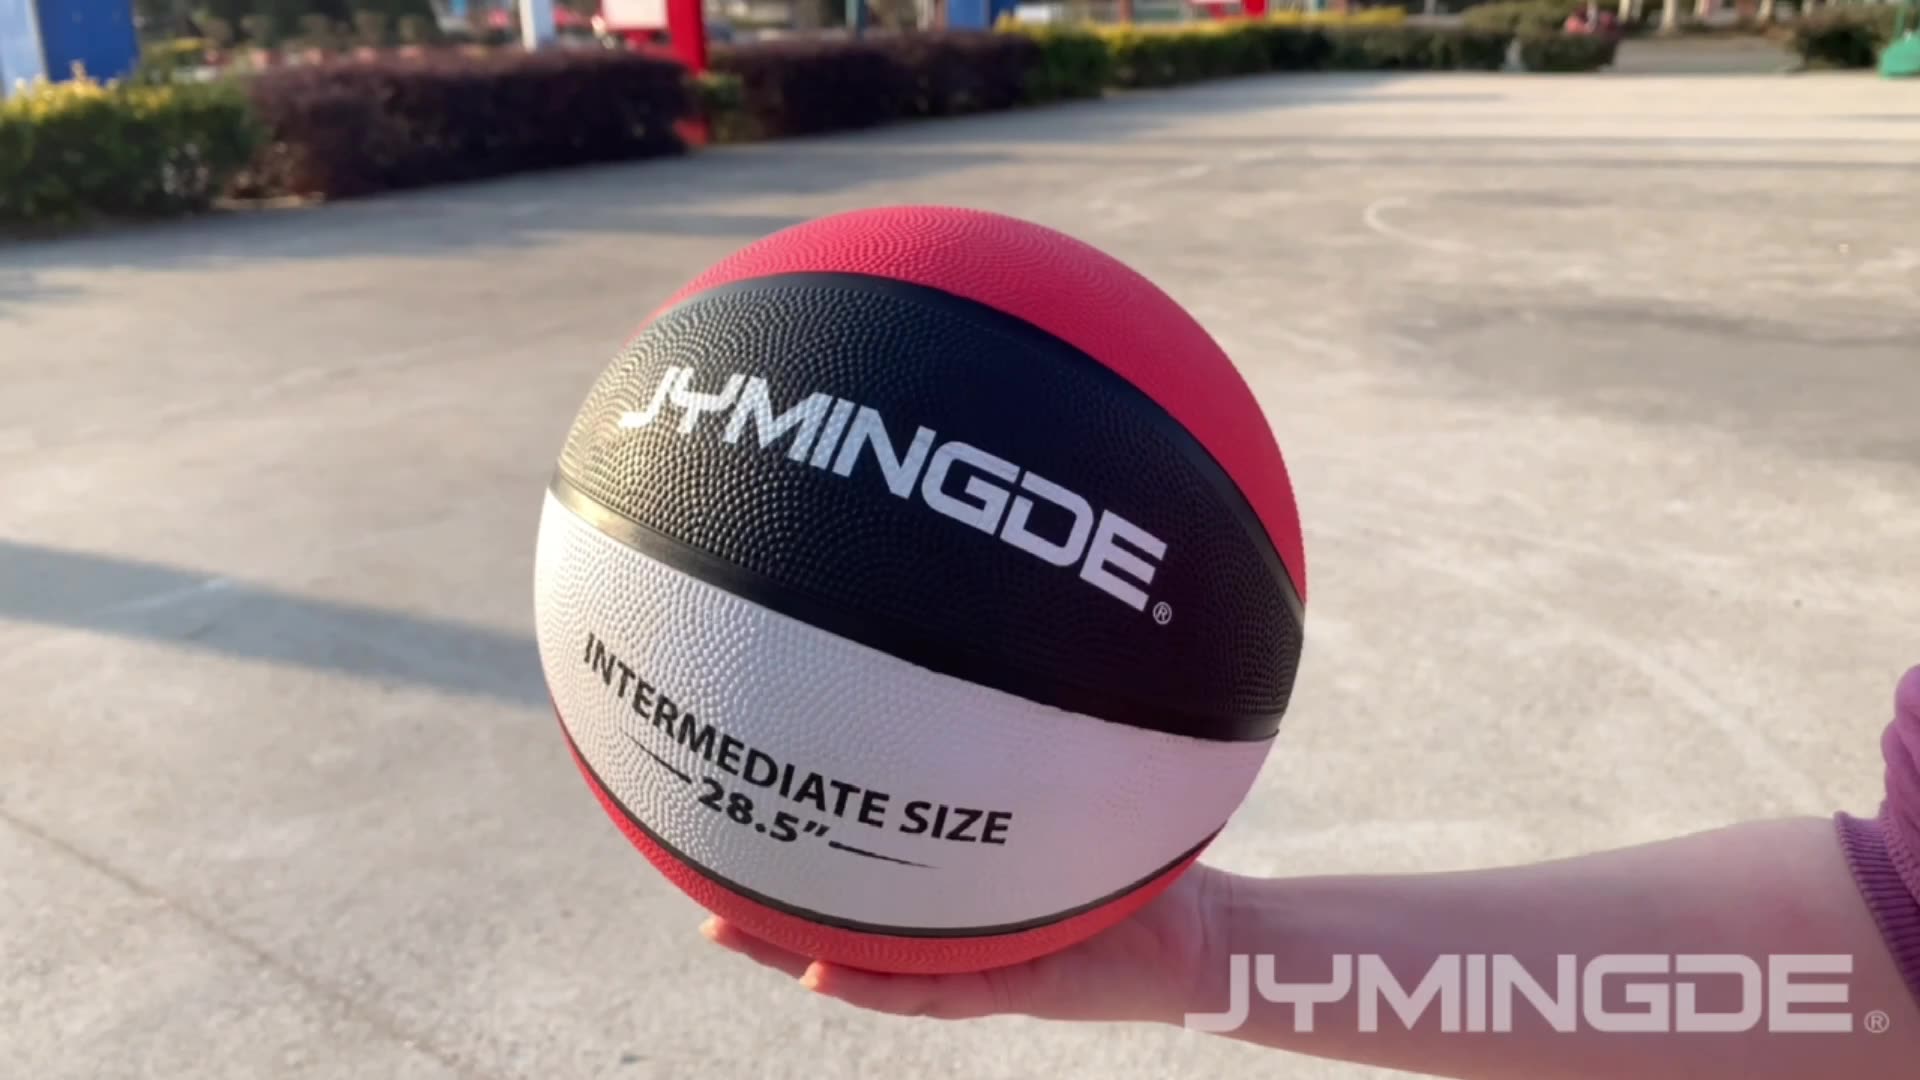 Sample available outdoor inflatable training custom rubber basketball ball size 71